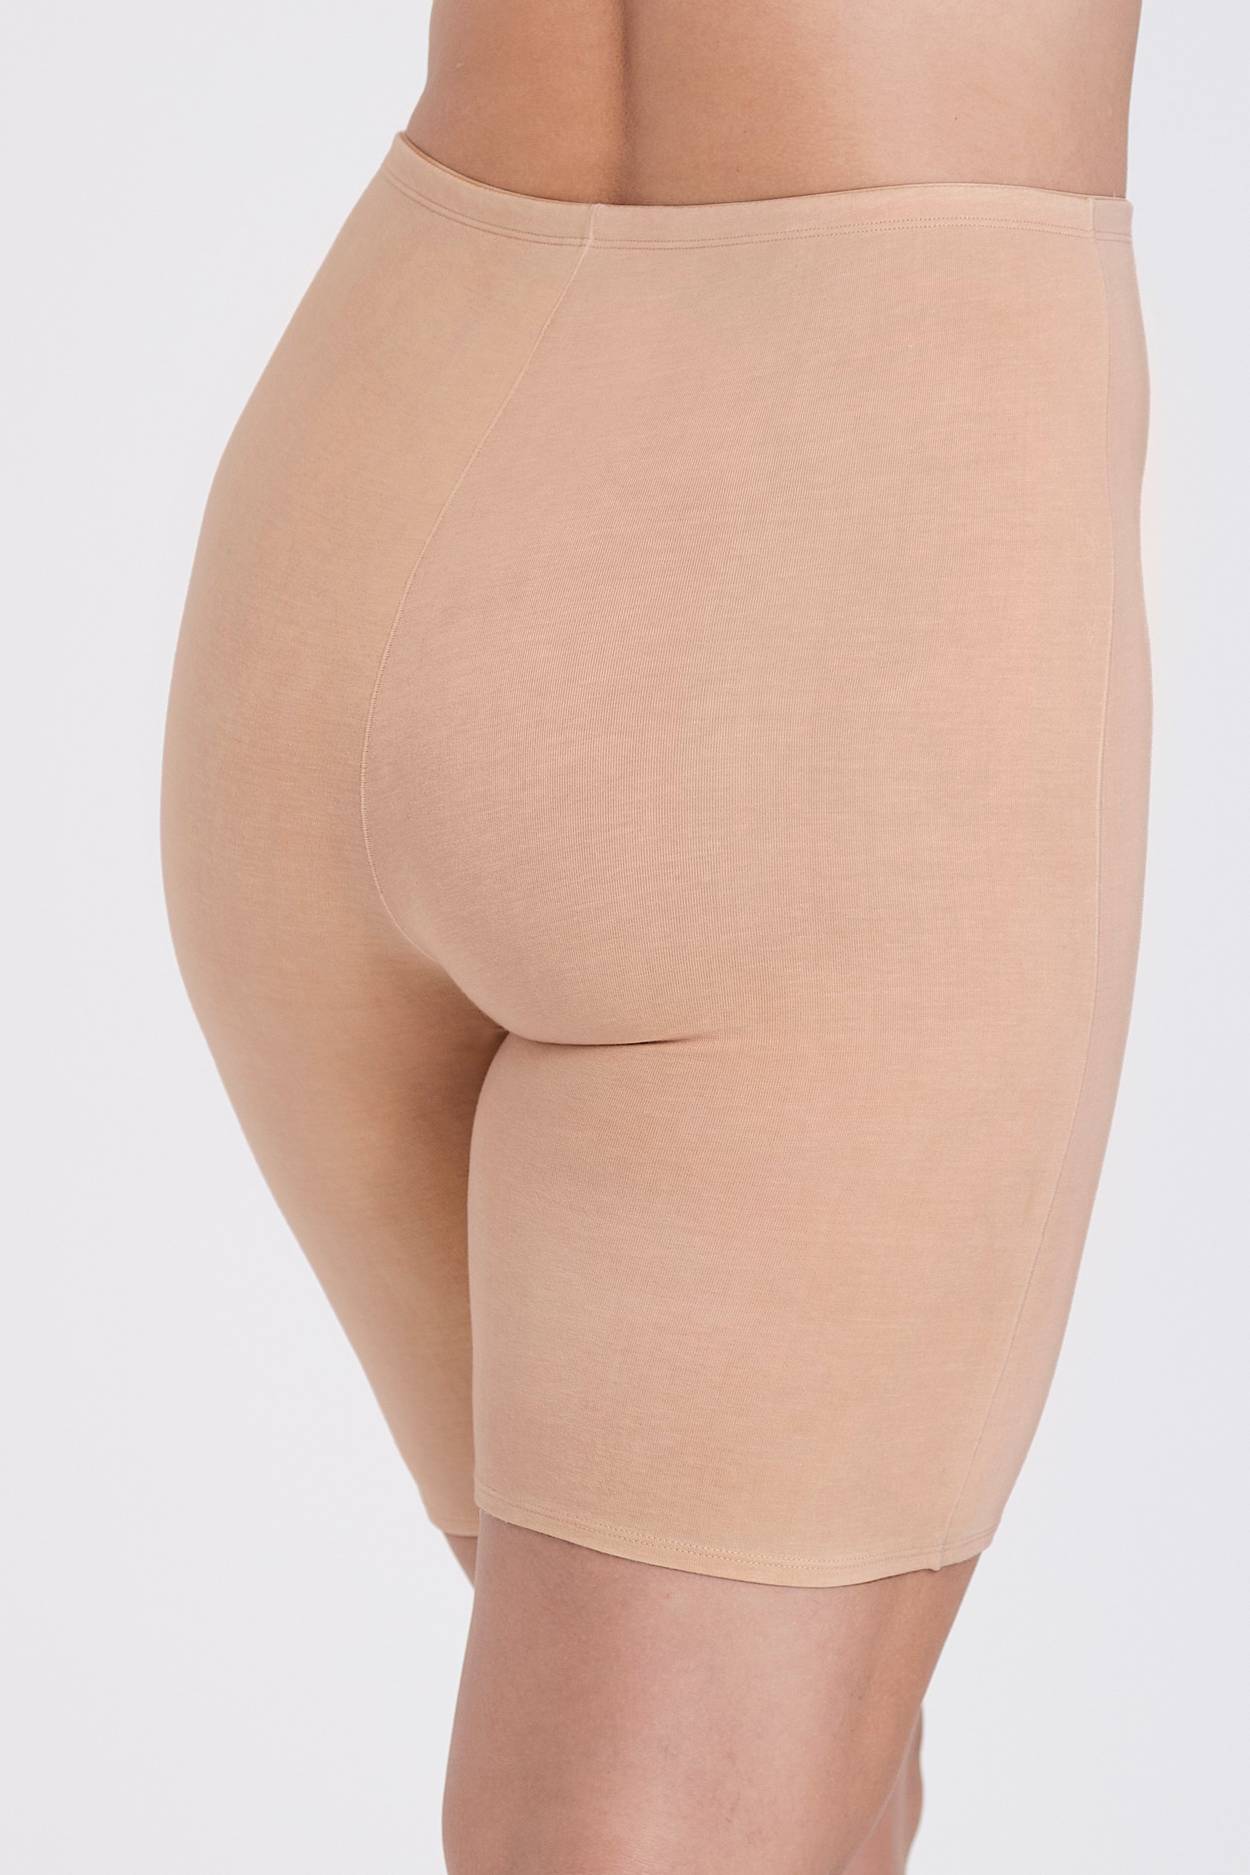 Organic Cotton panty with long legs